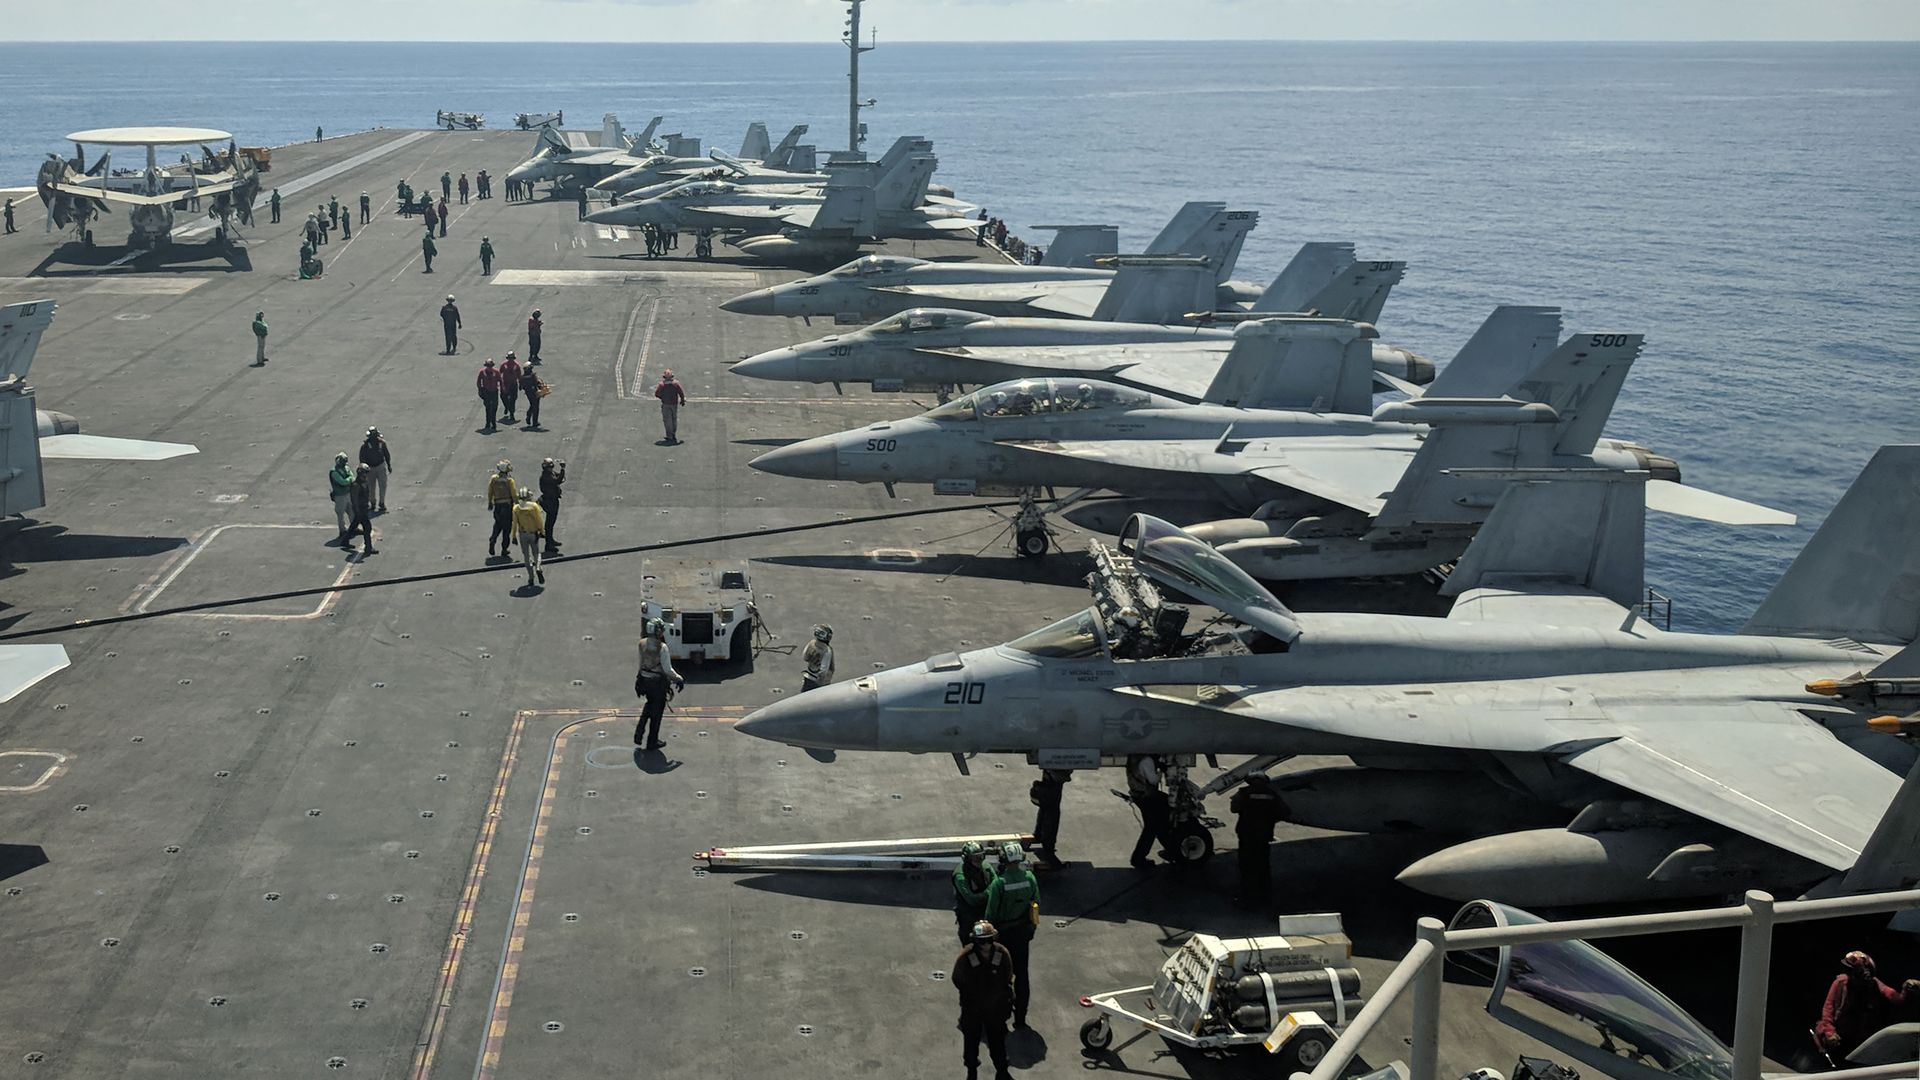 US Navy personnel and aircraft on board the USS Ronald Reagan in October 2019 in the South China Sea.